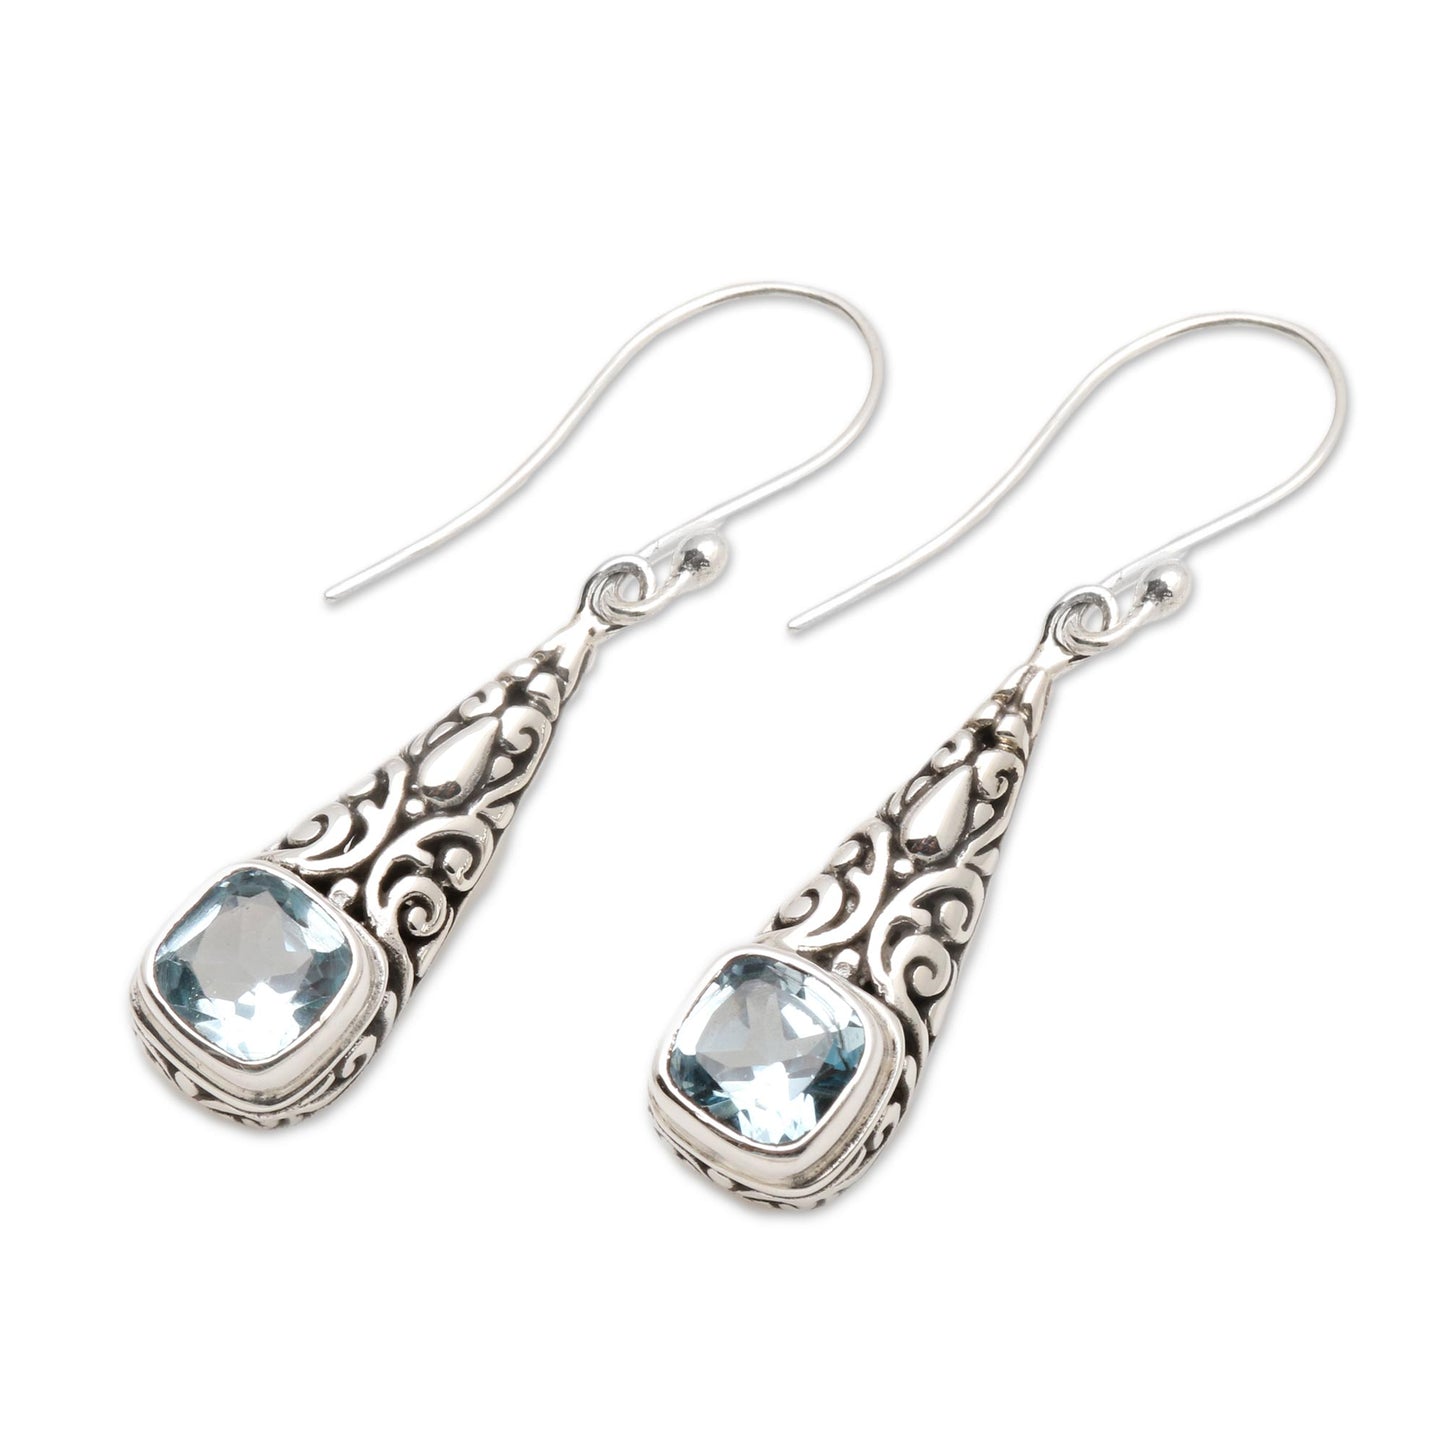 Expression of Joy Balinese Fair Trade Silver and Blue Topaz Earrings